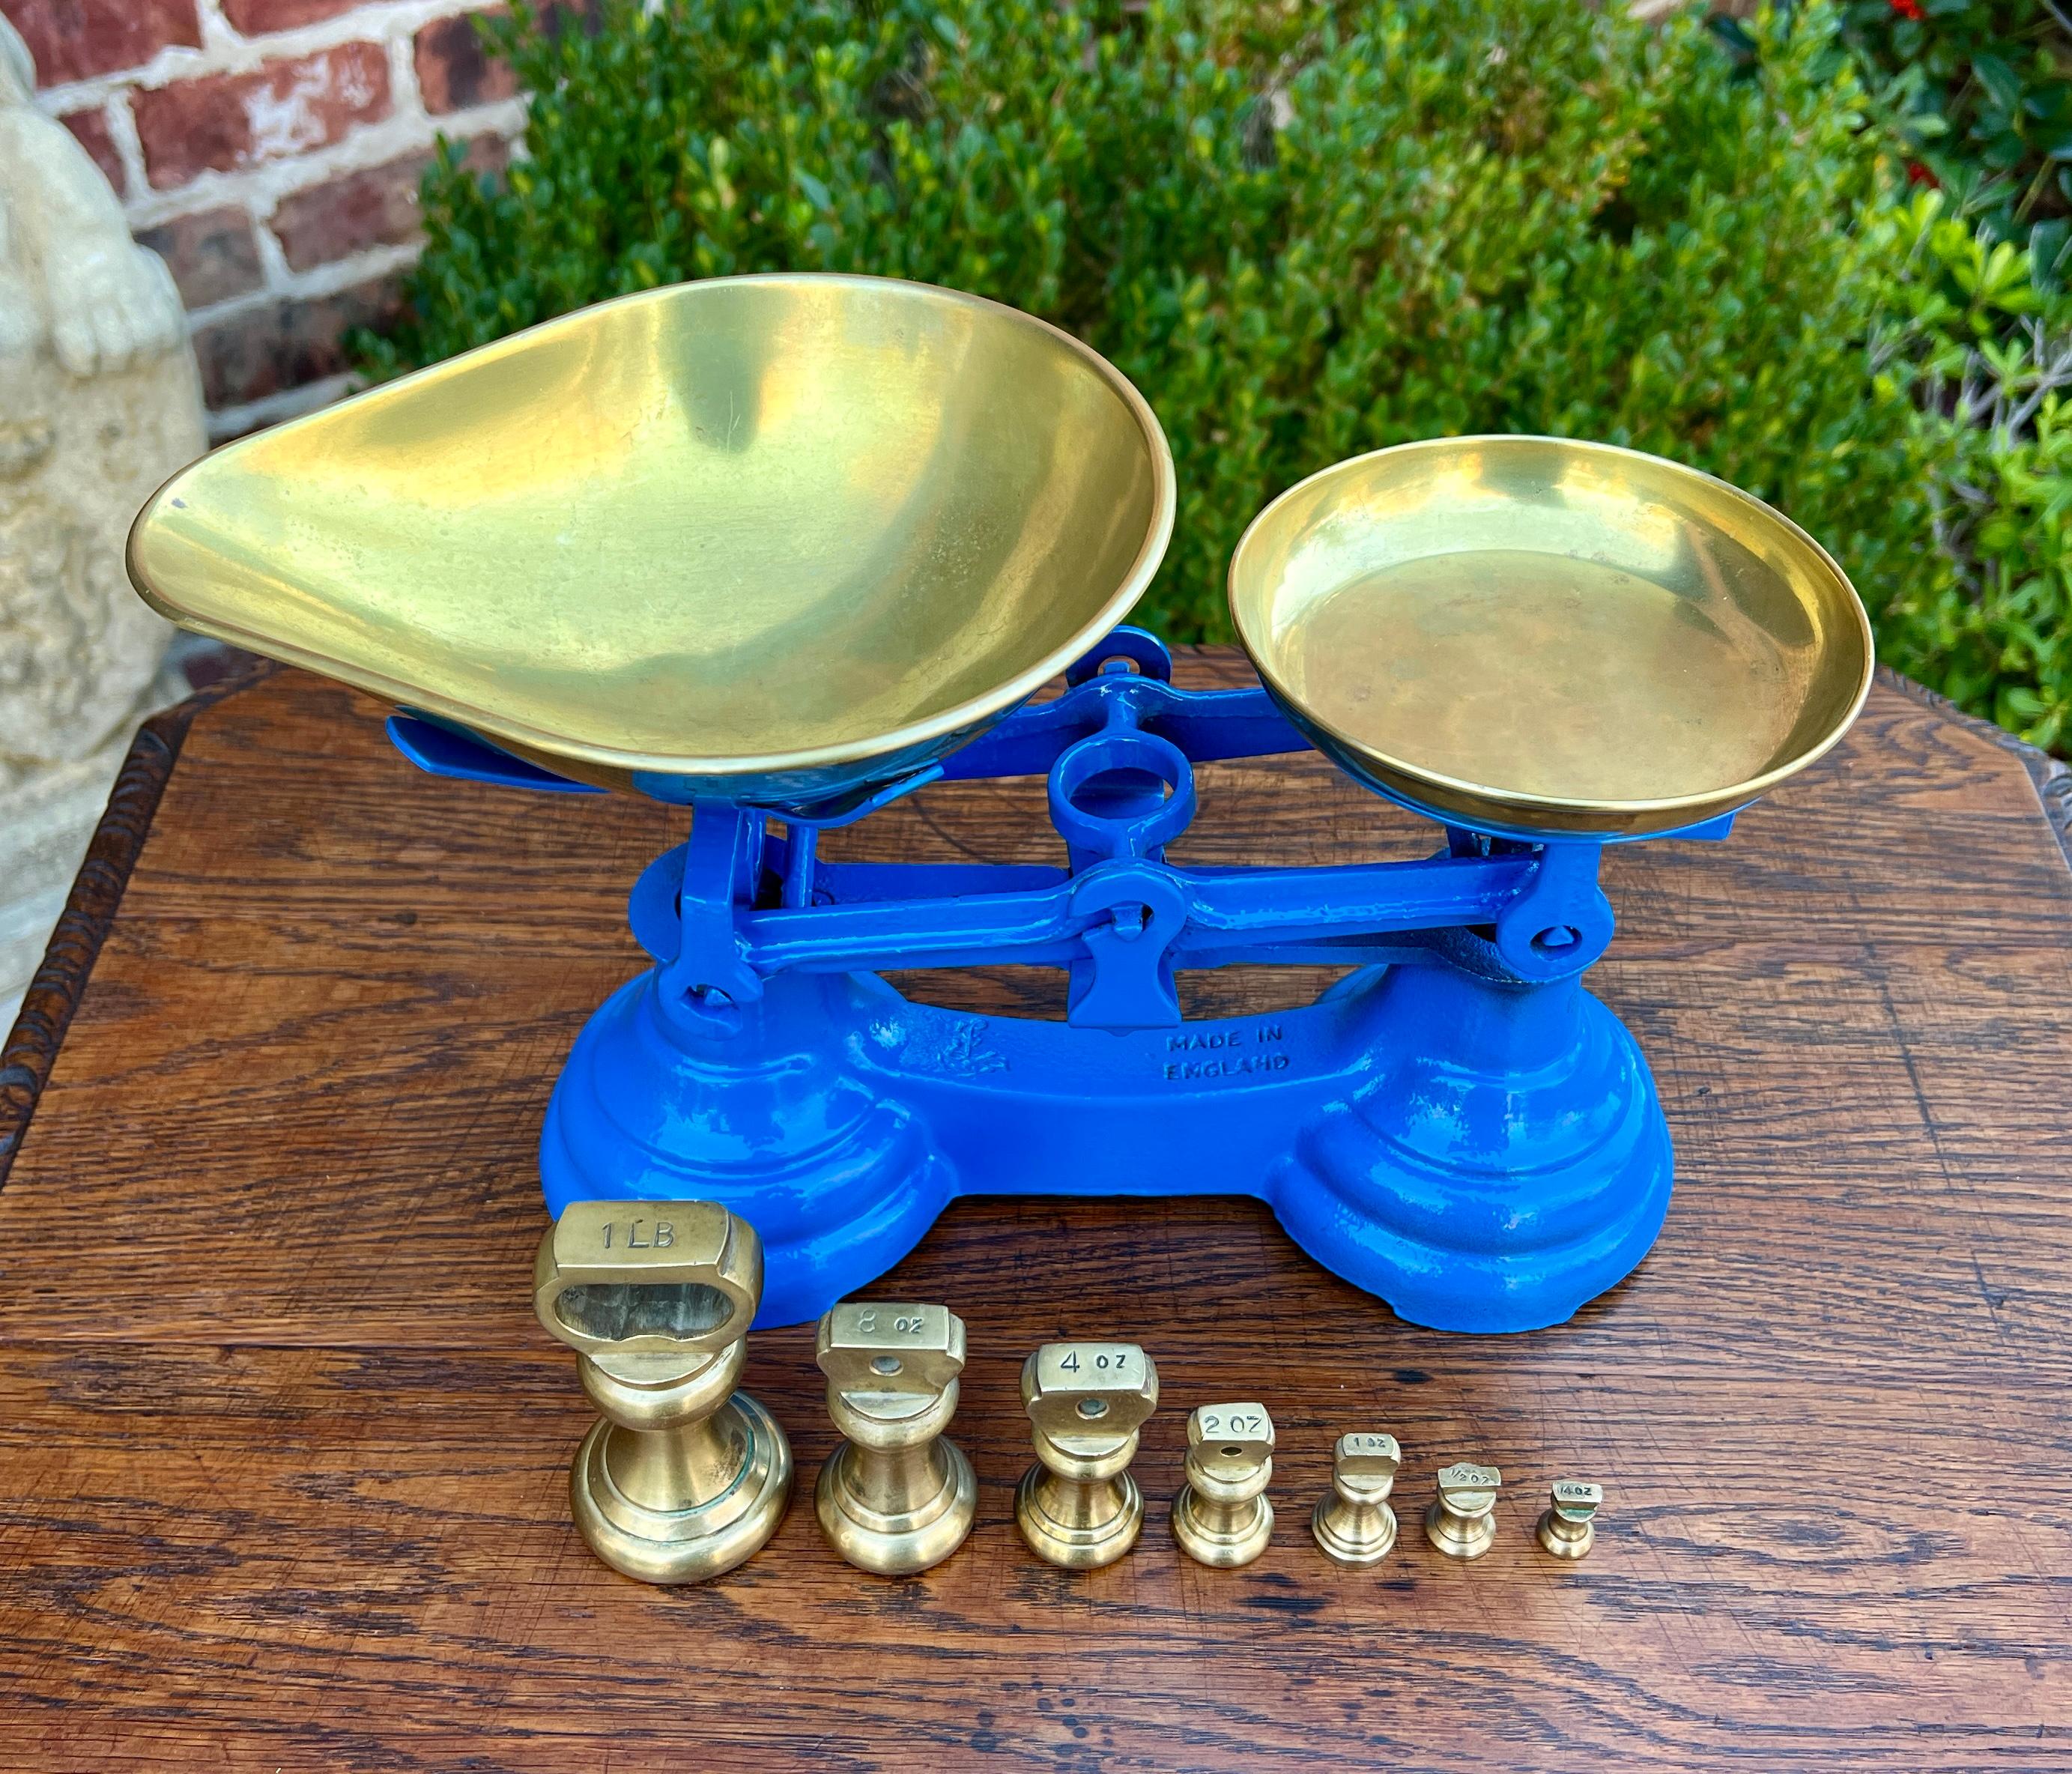 EXCELLENT Antique English Blue Shop Scale with Brass Pans and 7 Graduated Weights~~c. 1930

Weights measure from 1/4 oz to 1 lb

        8